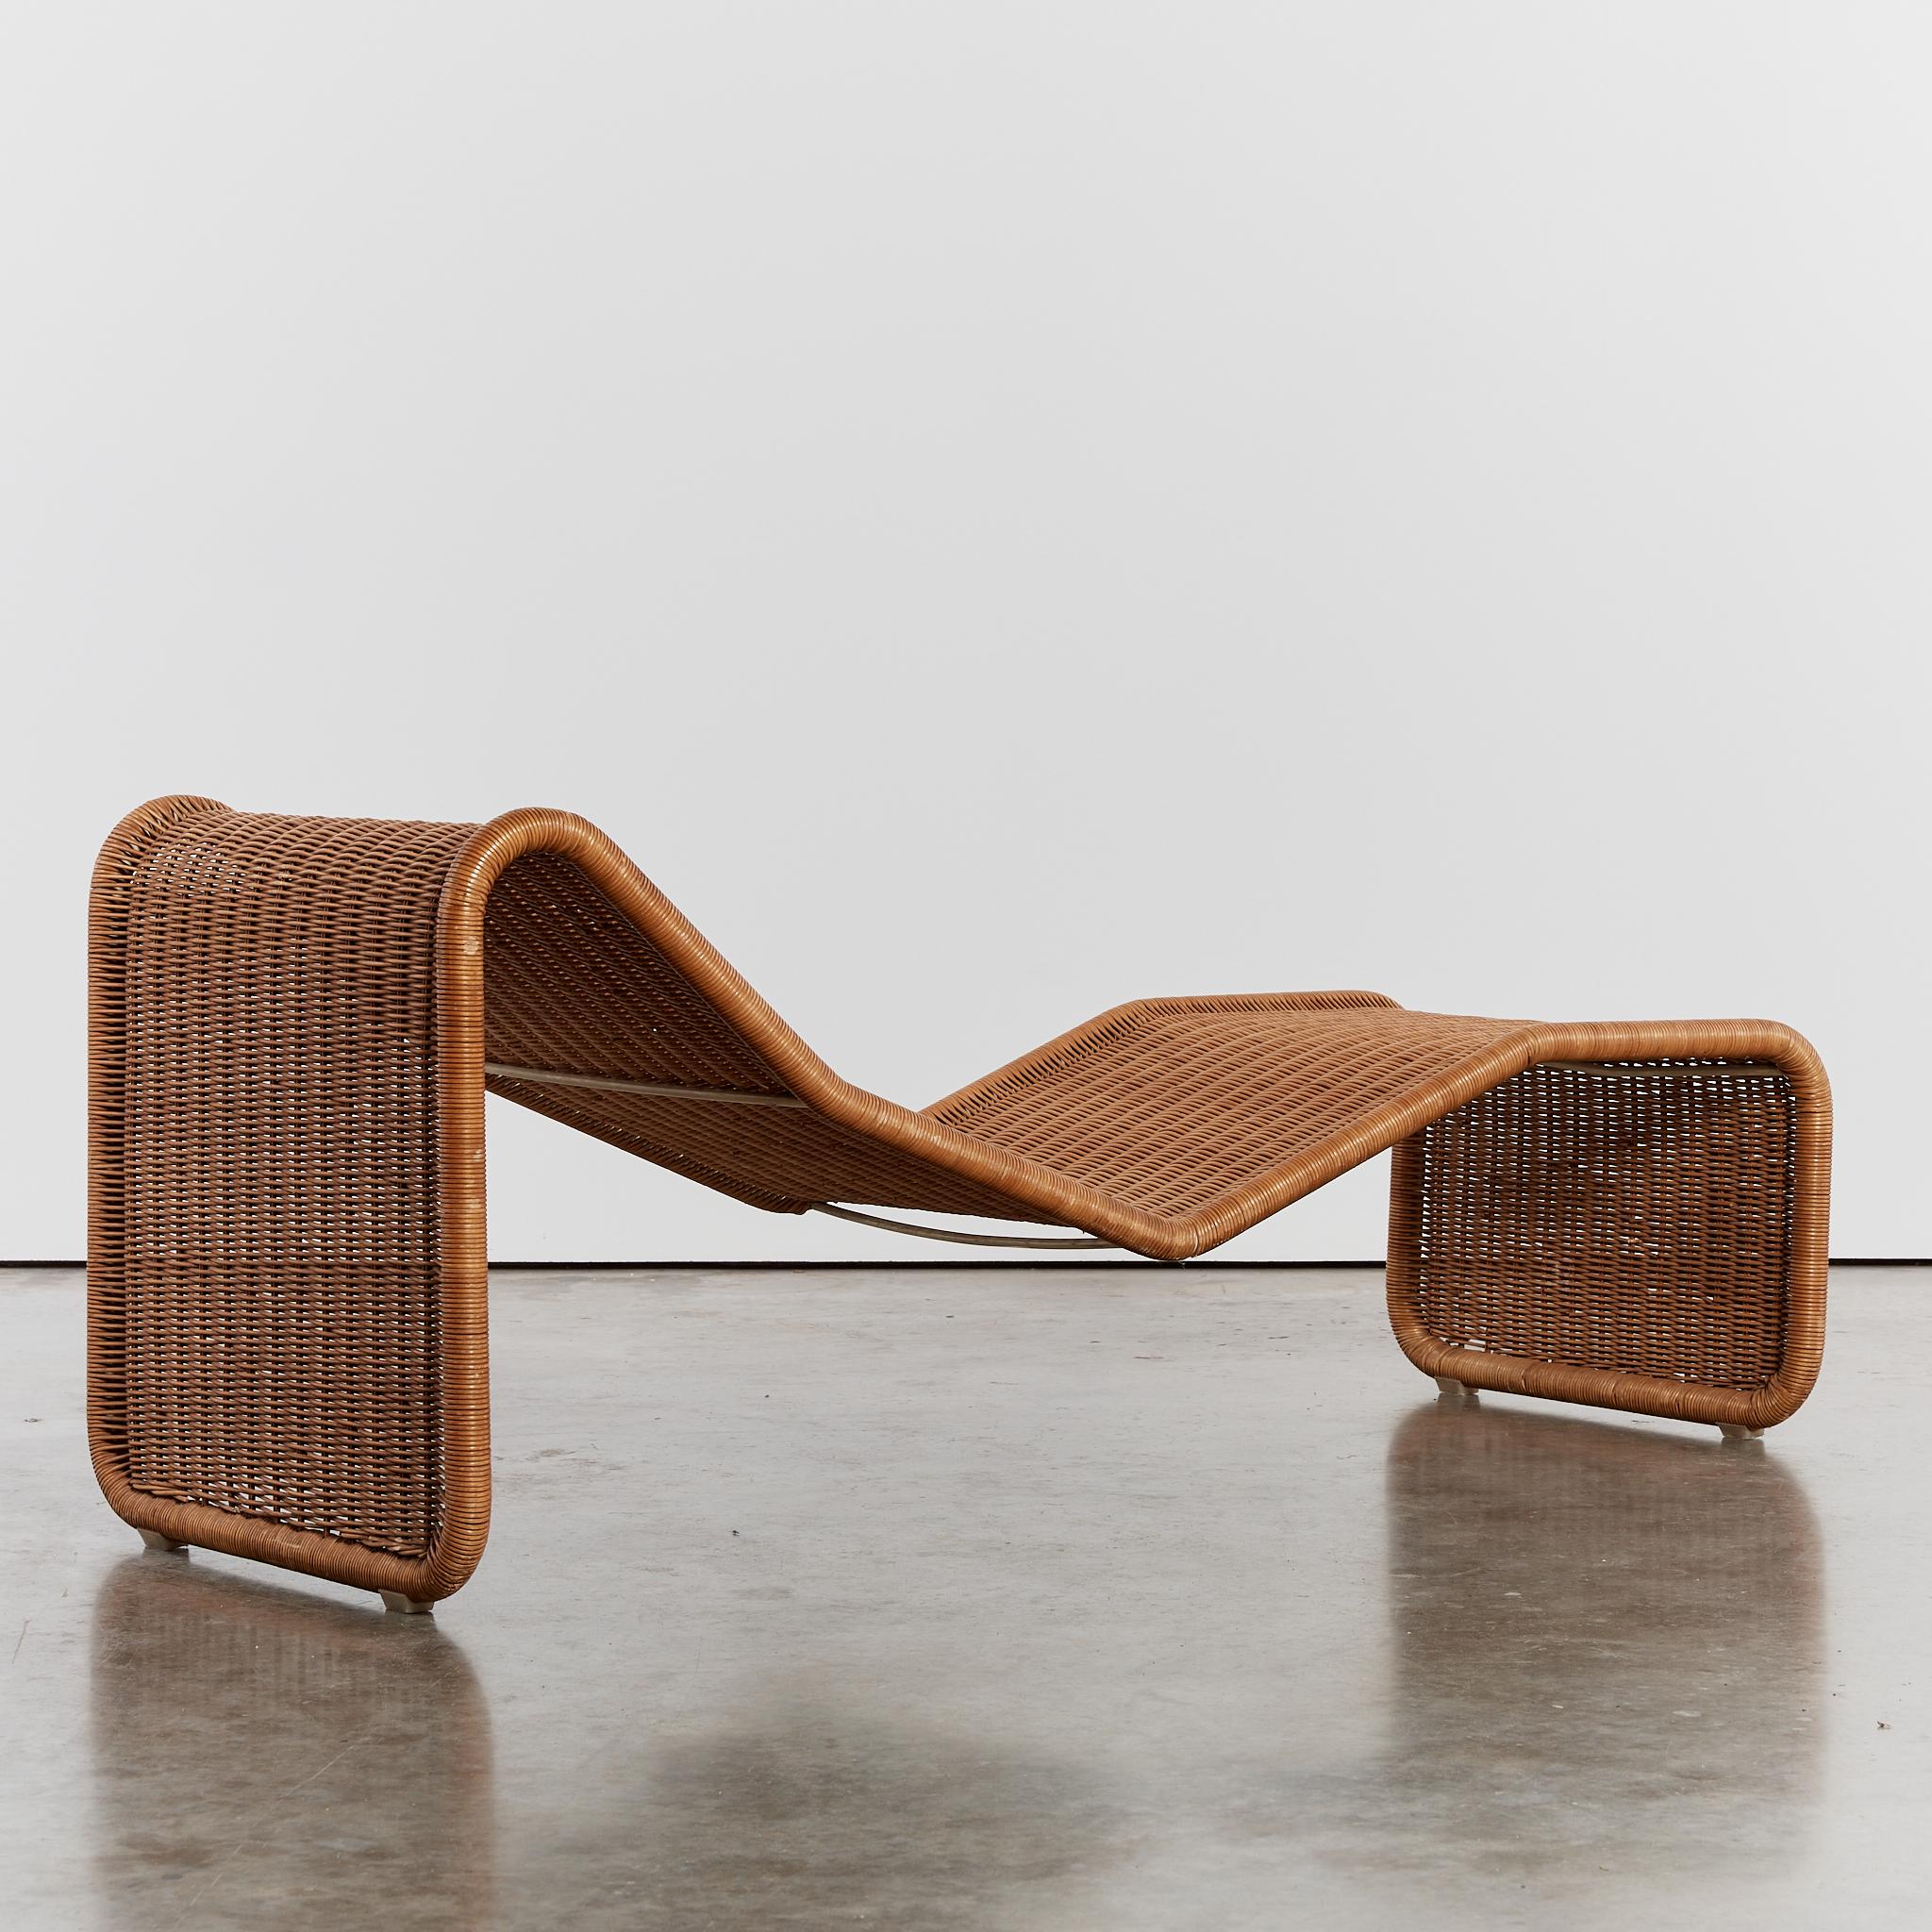 Rare P3 rattan chaise lounge chair by Tito Agnoli for Bocacina 1960's In Good Condition For Sale In London, GB